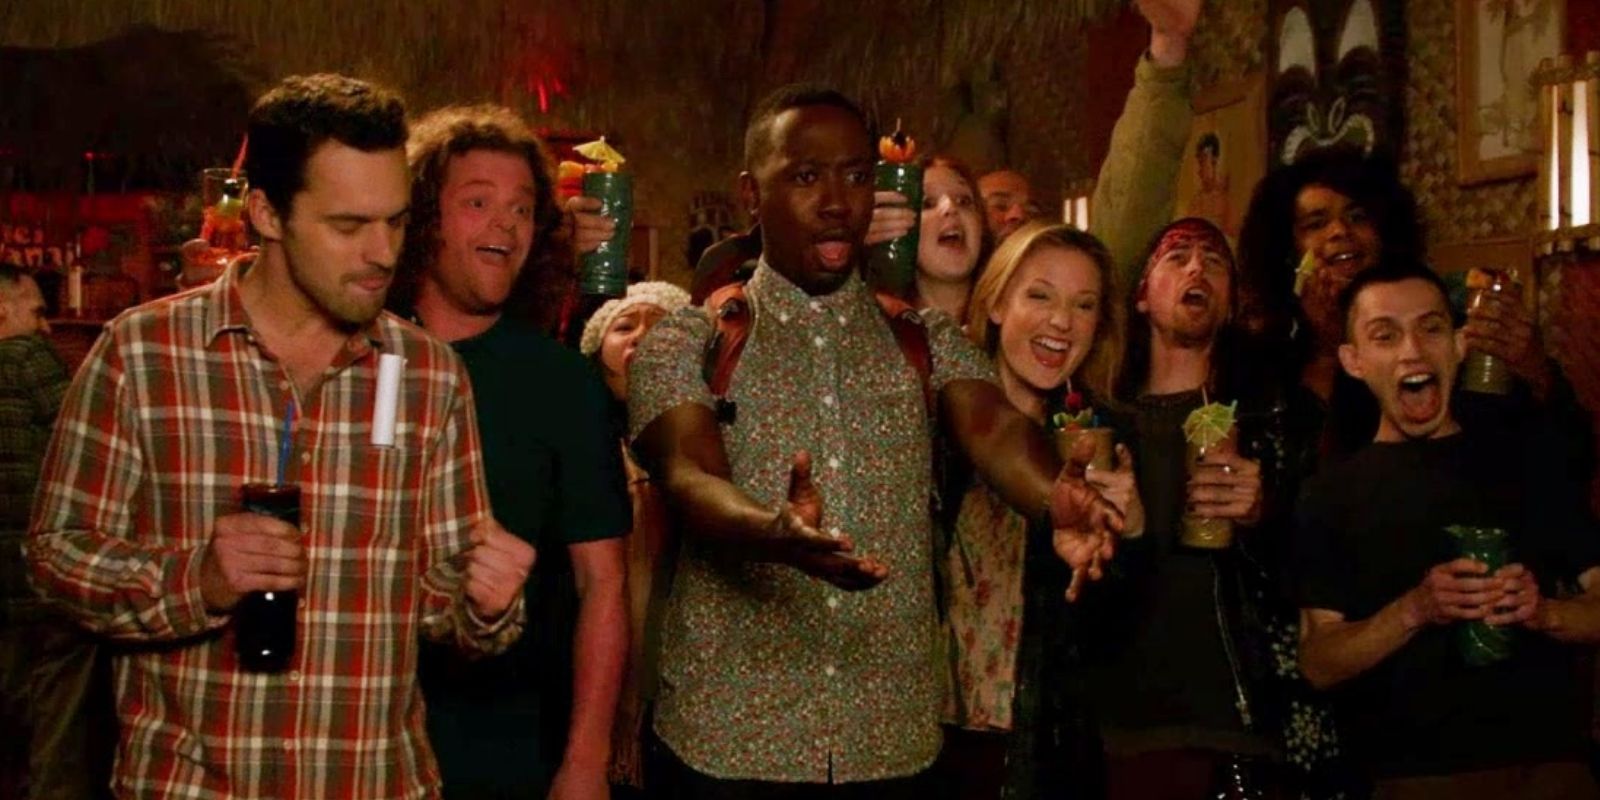 Nick and Winston in a crowd in a bar in New Girl S4E15 The Crawl